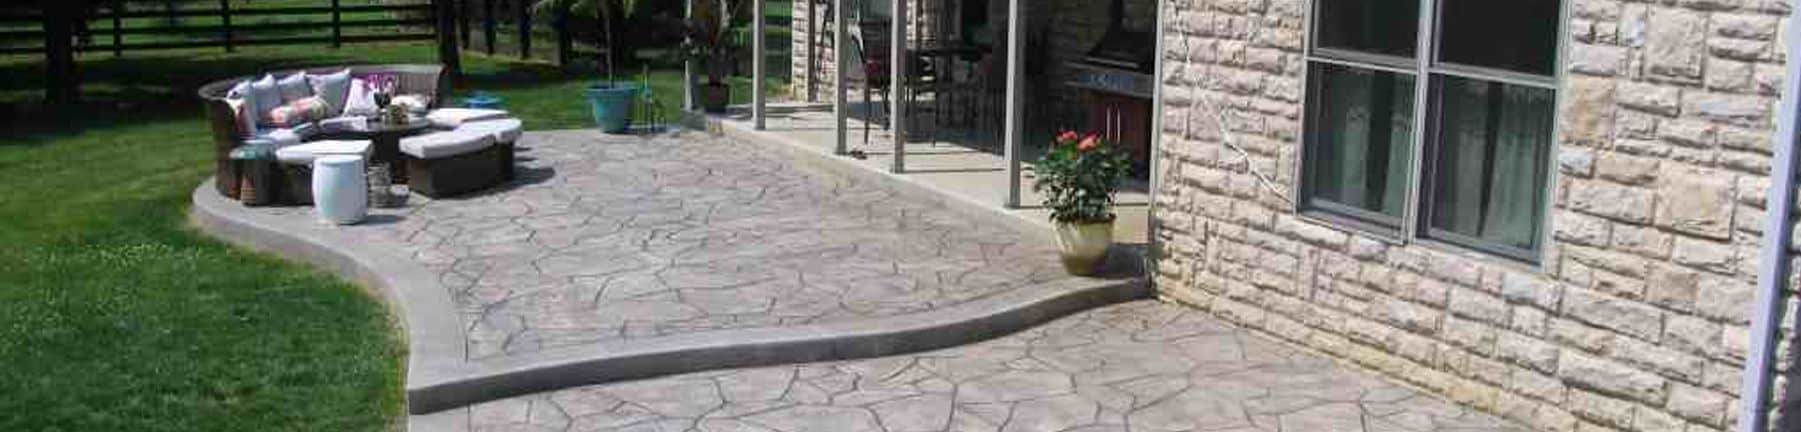 Residential Paving Contractor Fairport, NY